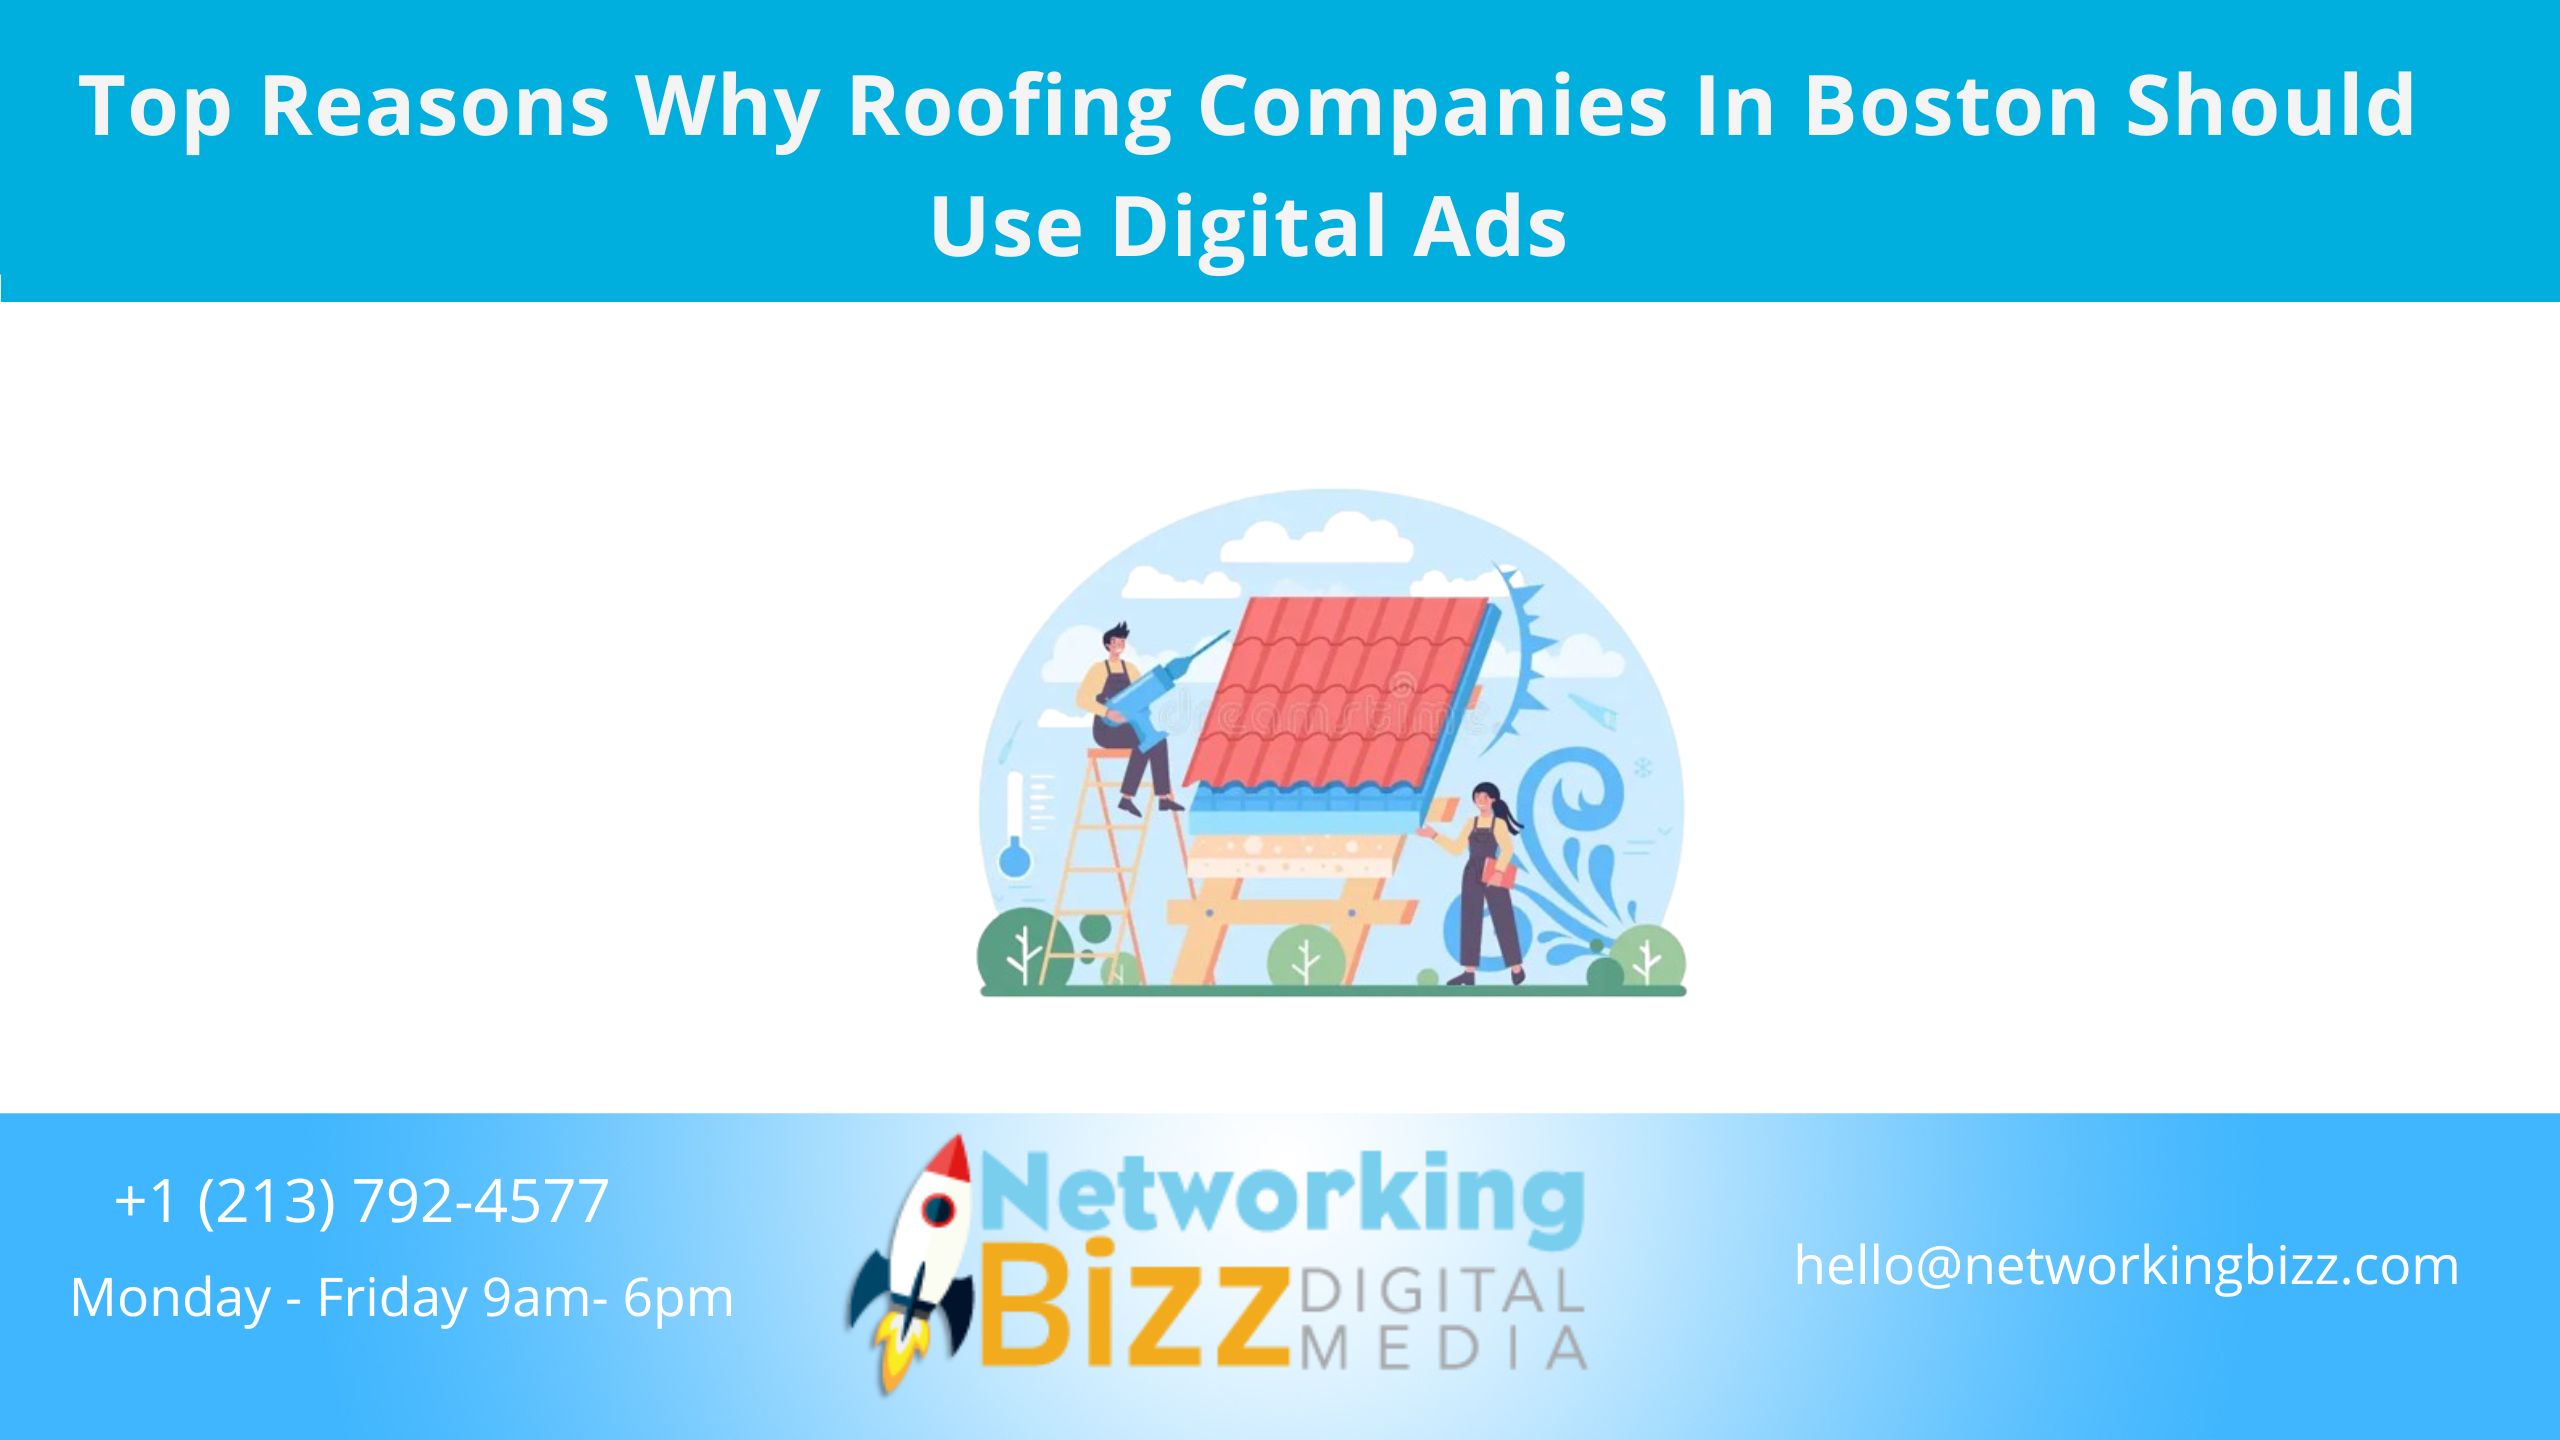 Top Reasons Why Roofing Companies In Boston Should Use Digital Ads